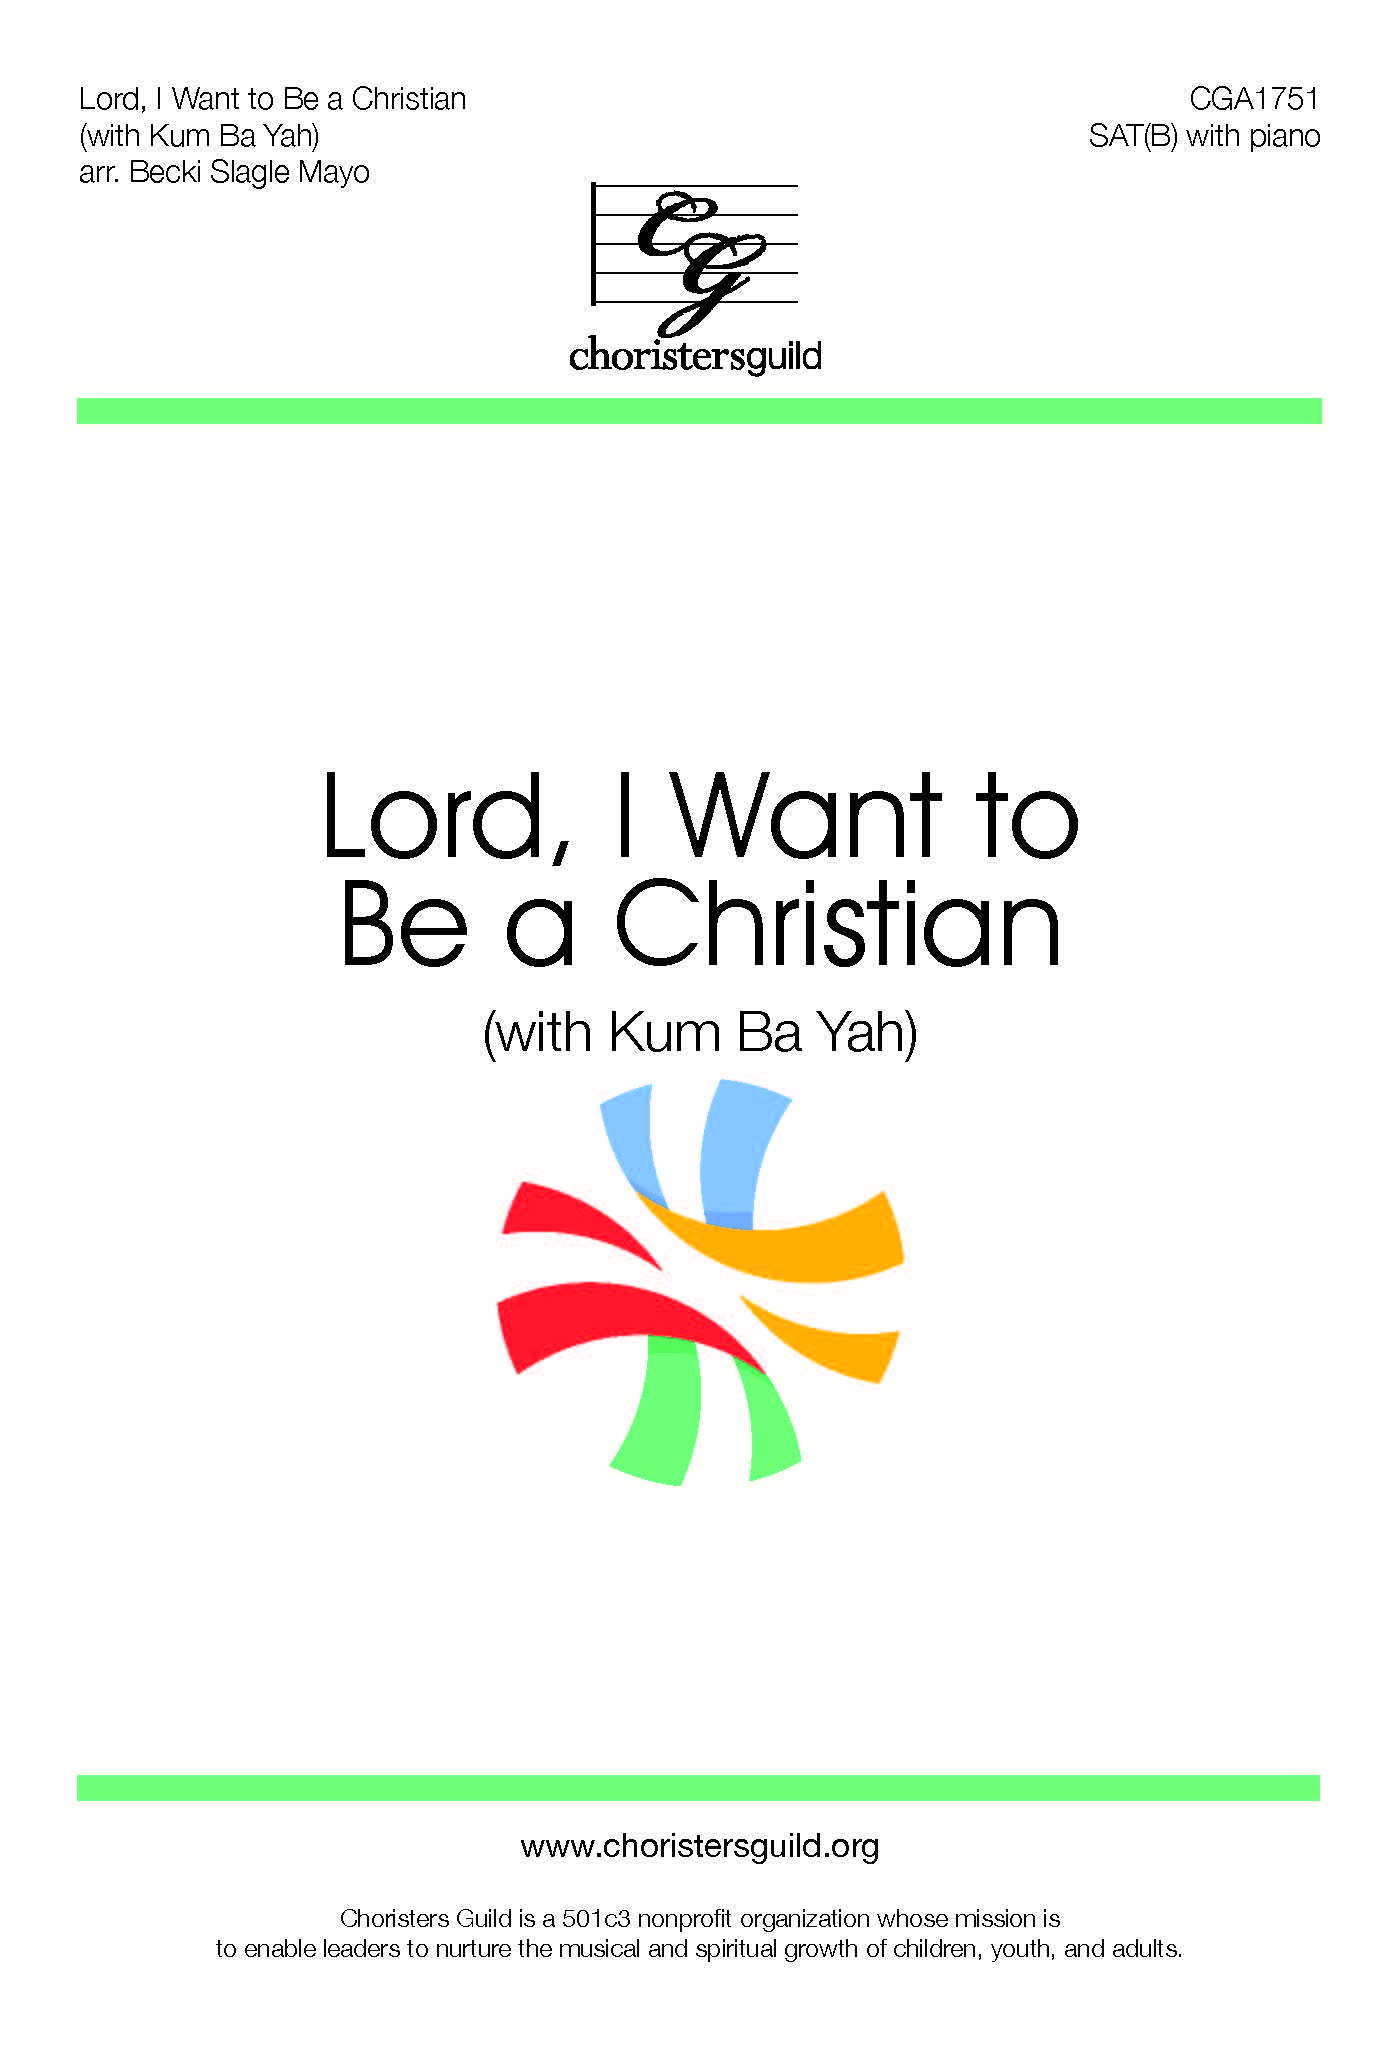 Lord, I Want to Be a Christian (with Kum Ba Yah) - SAT(B)